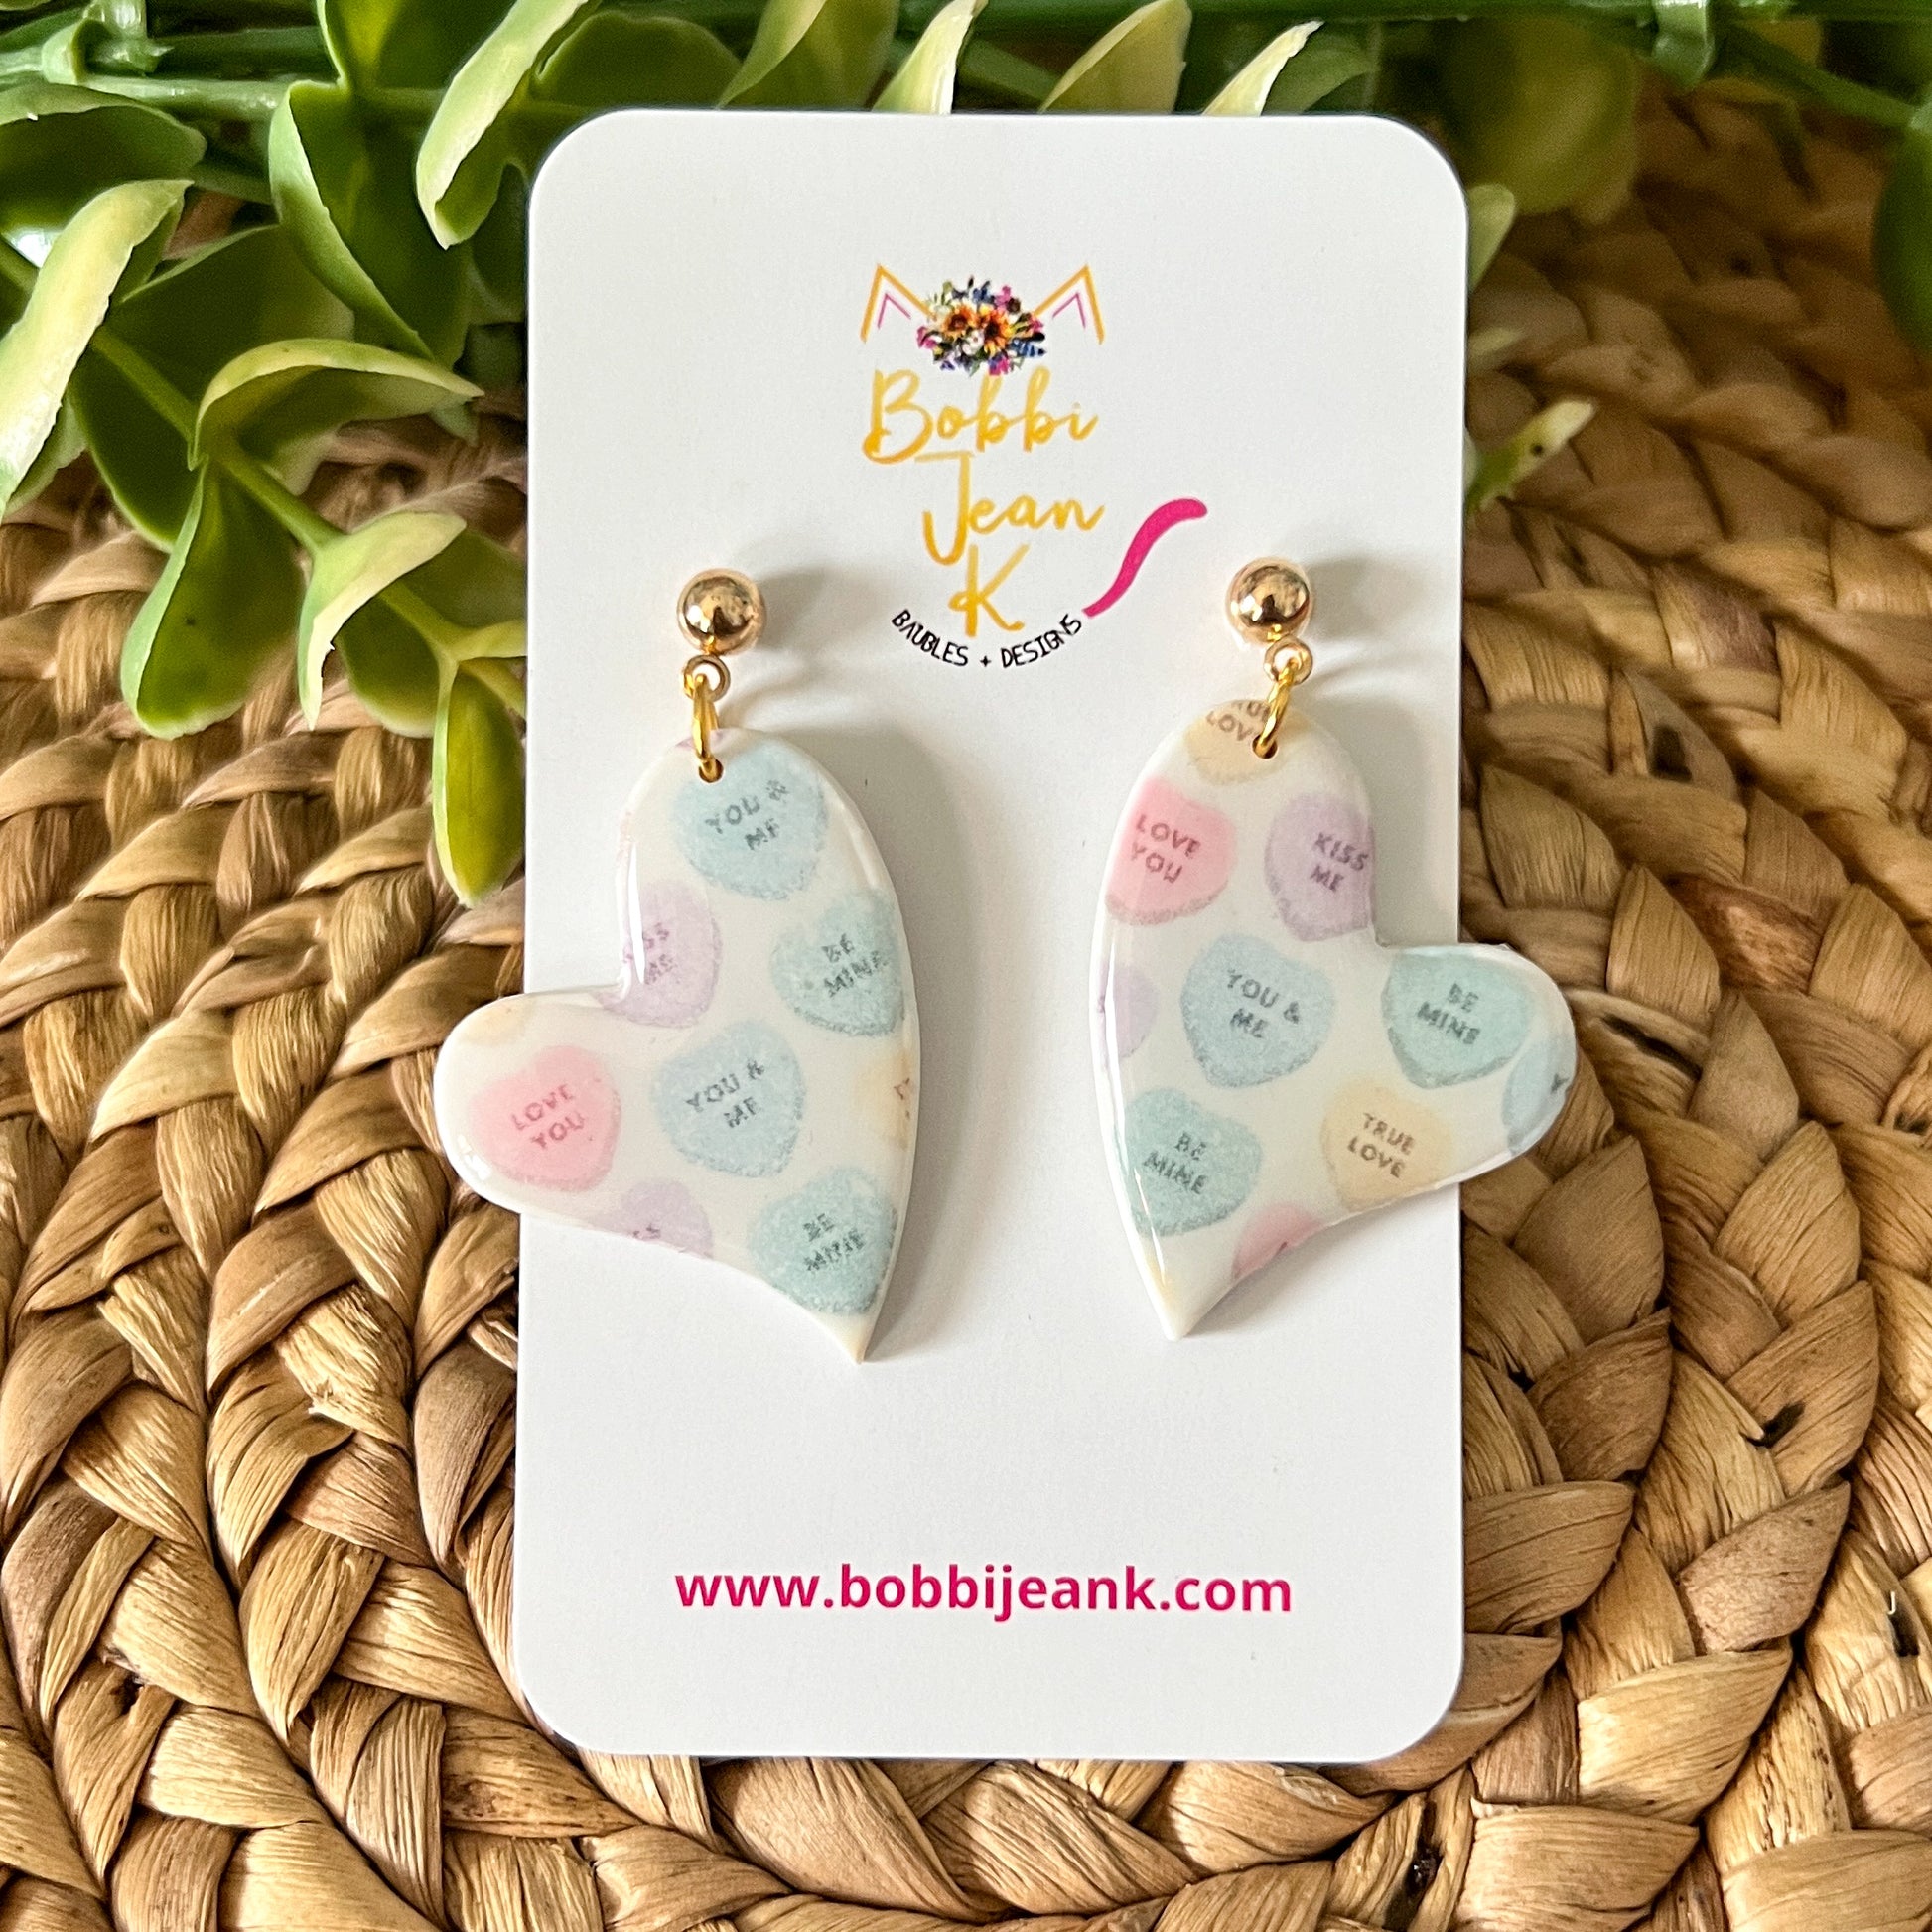 Vintage-Style Convo Heart Sway Clay Earrings